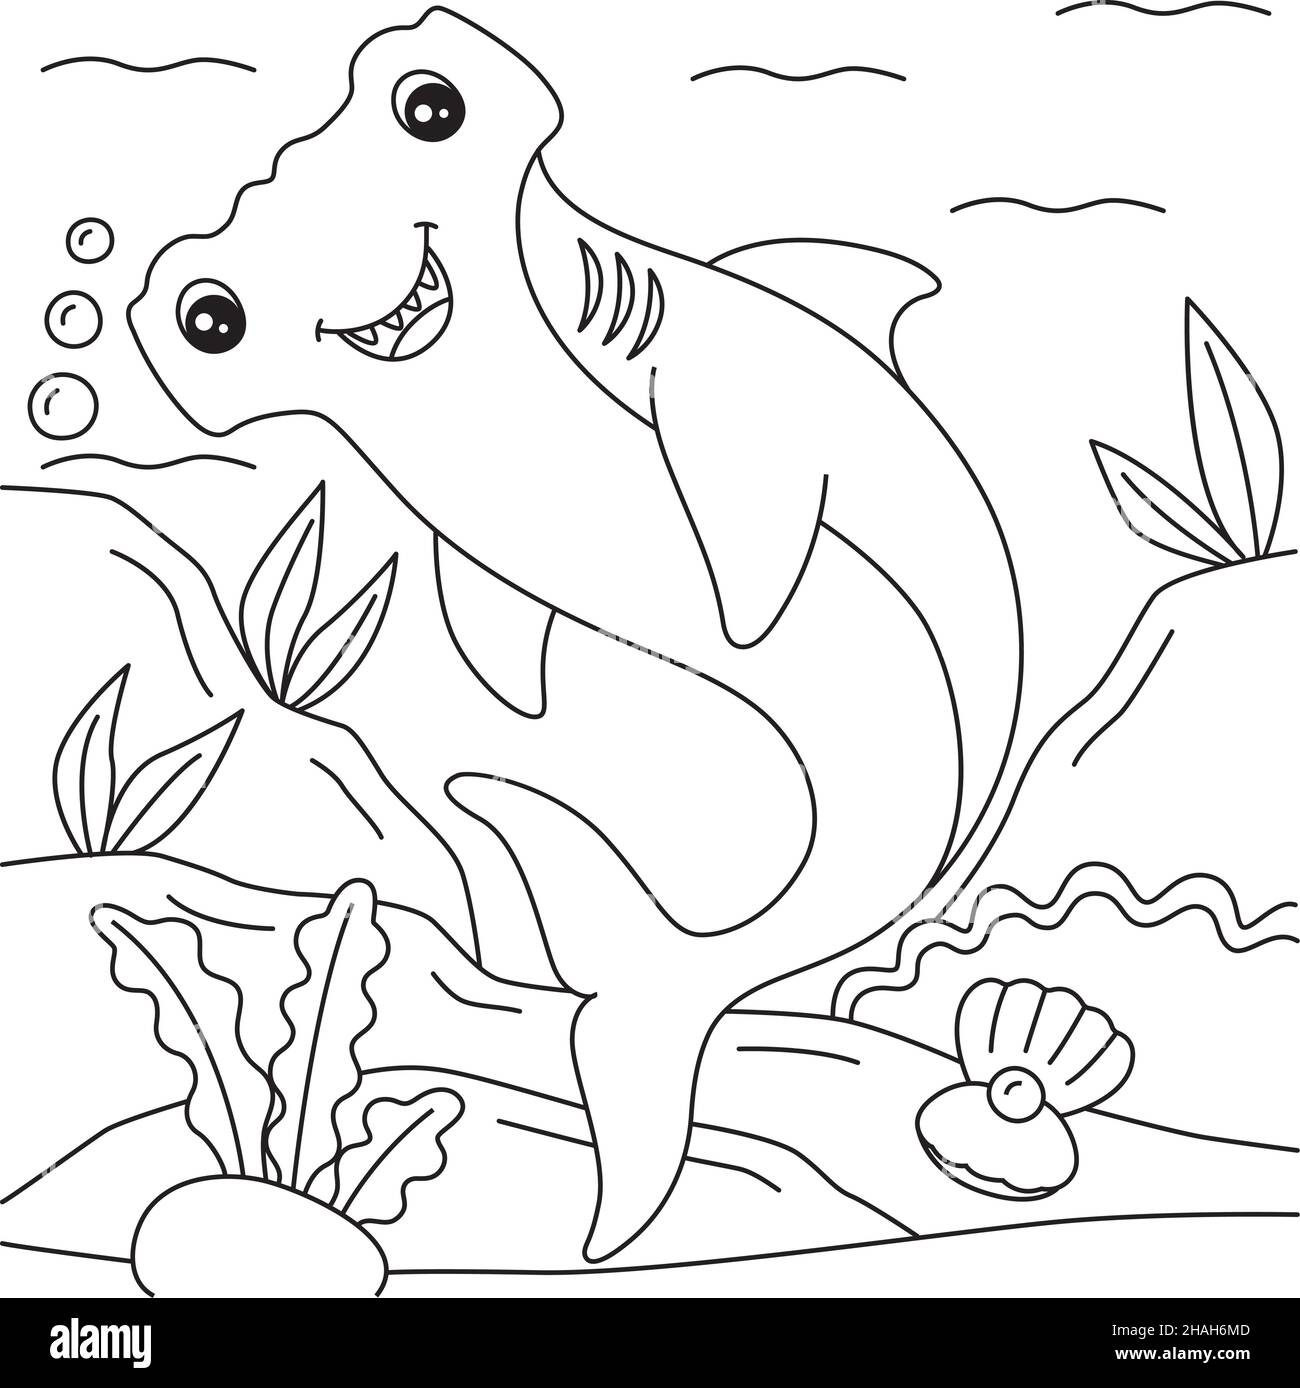 Hammerhead Shark Coloring Page for Kids Stock Vector